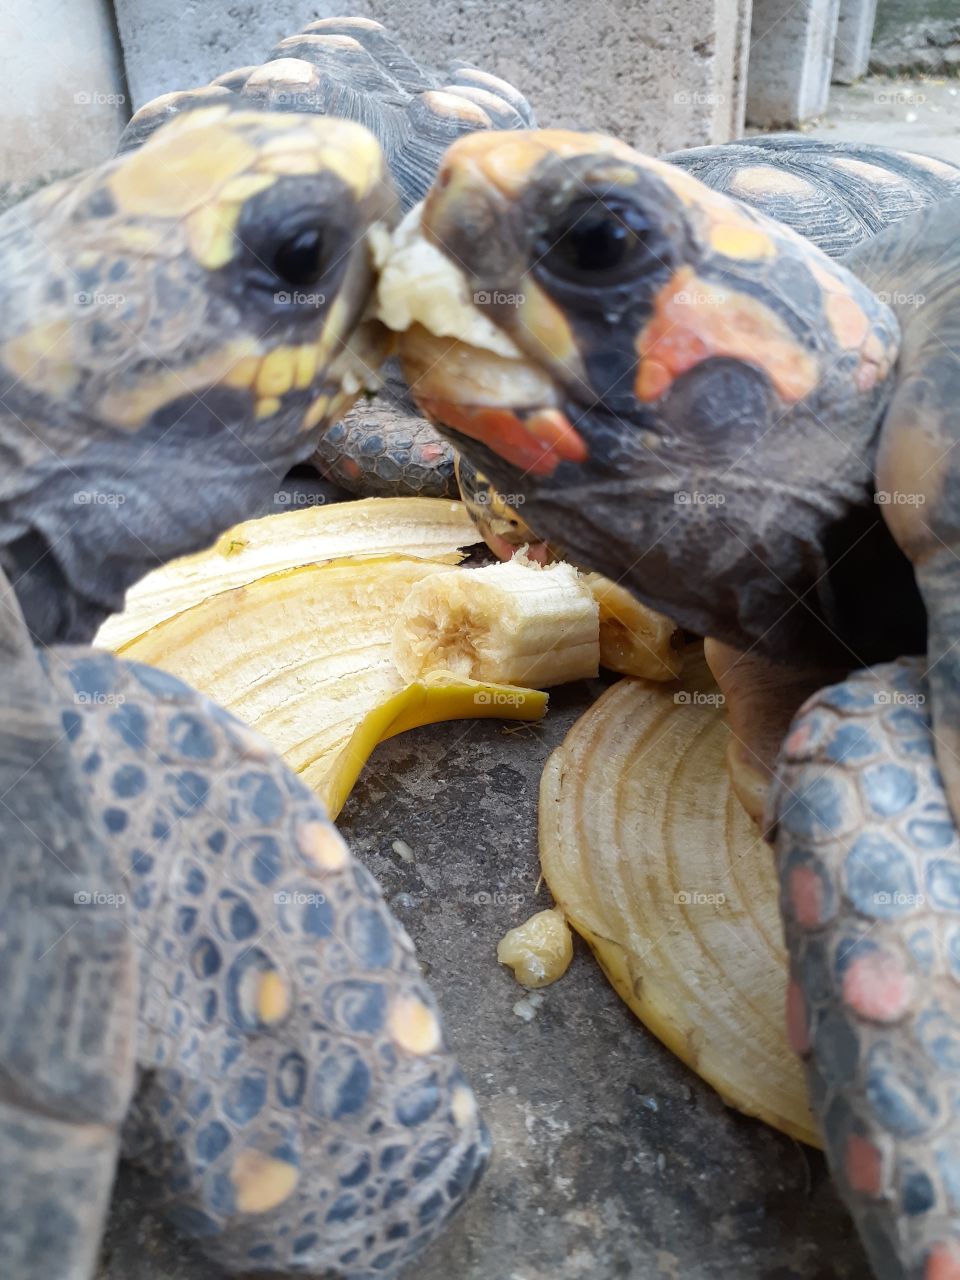 Tortoise version of "The lady and the Tramp"🤣. Couple of tortoises sharing a piece of bananas. This is actually a couple that lives in my backyard and I love them.